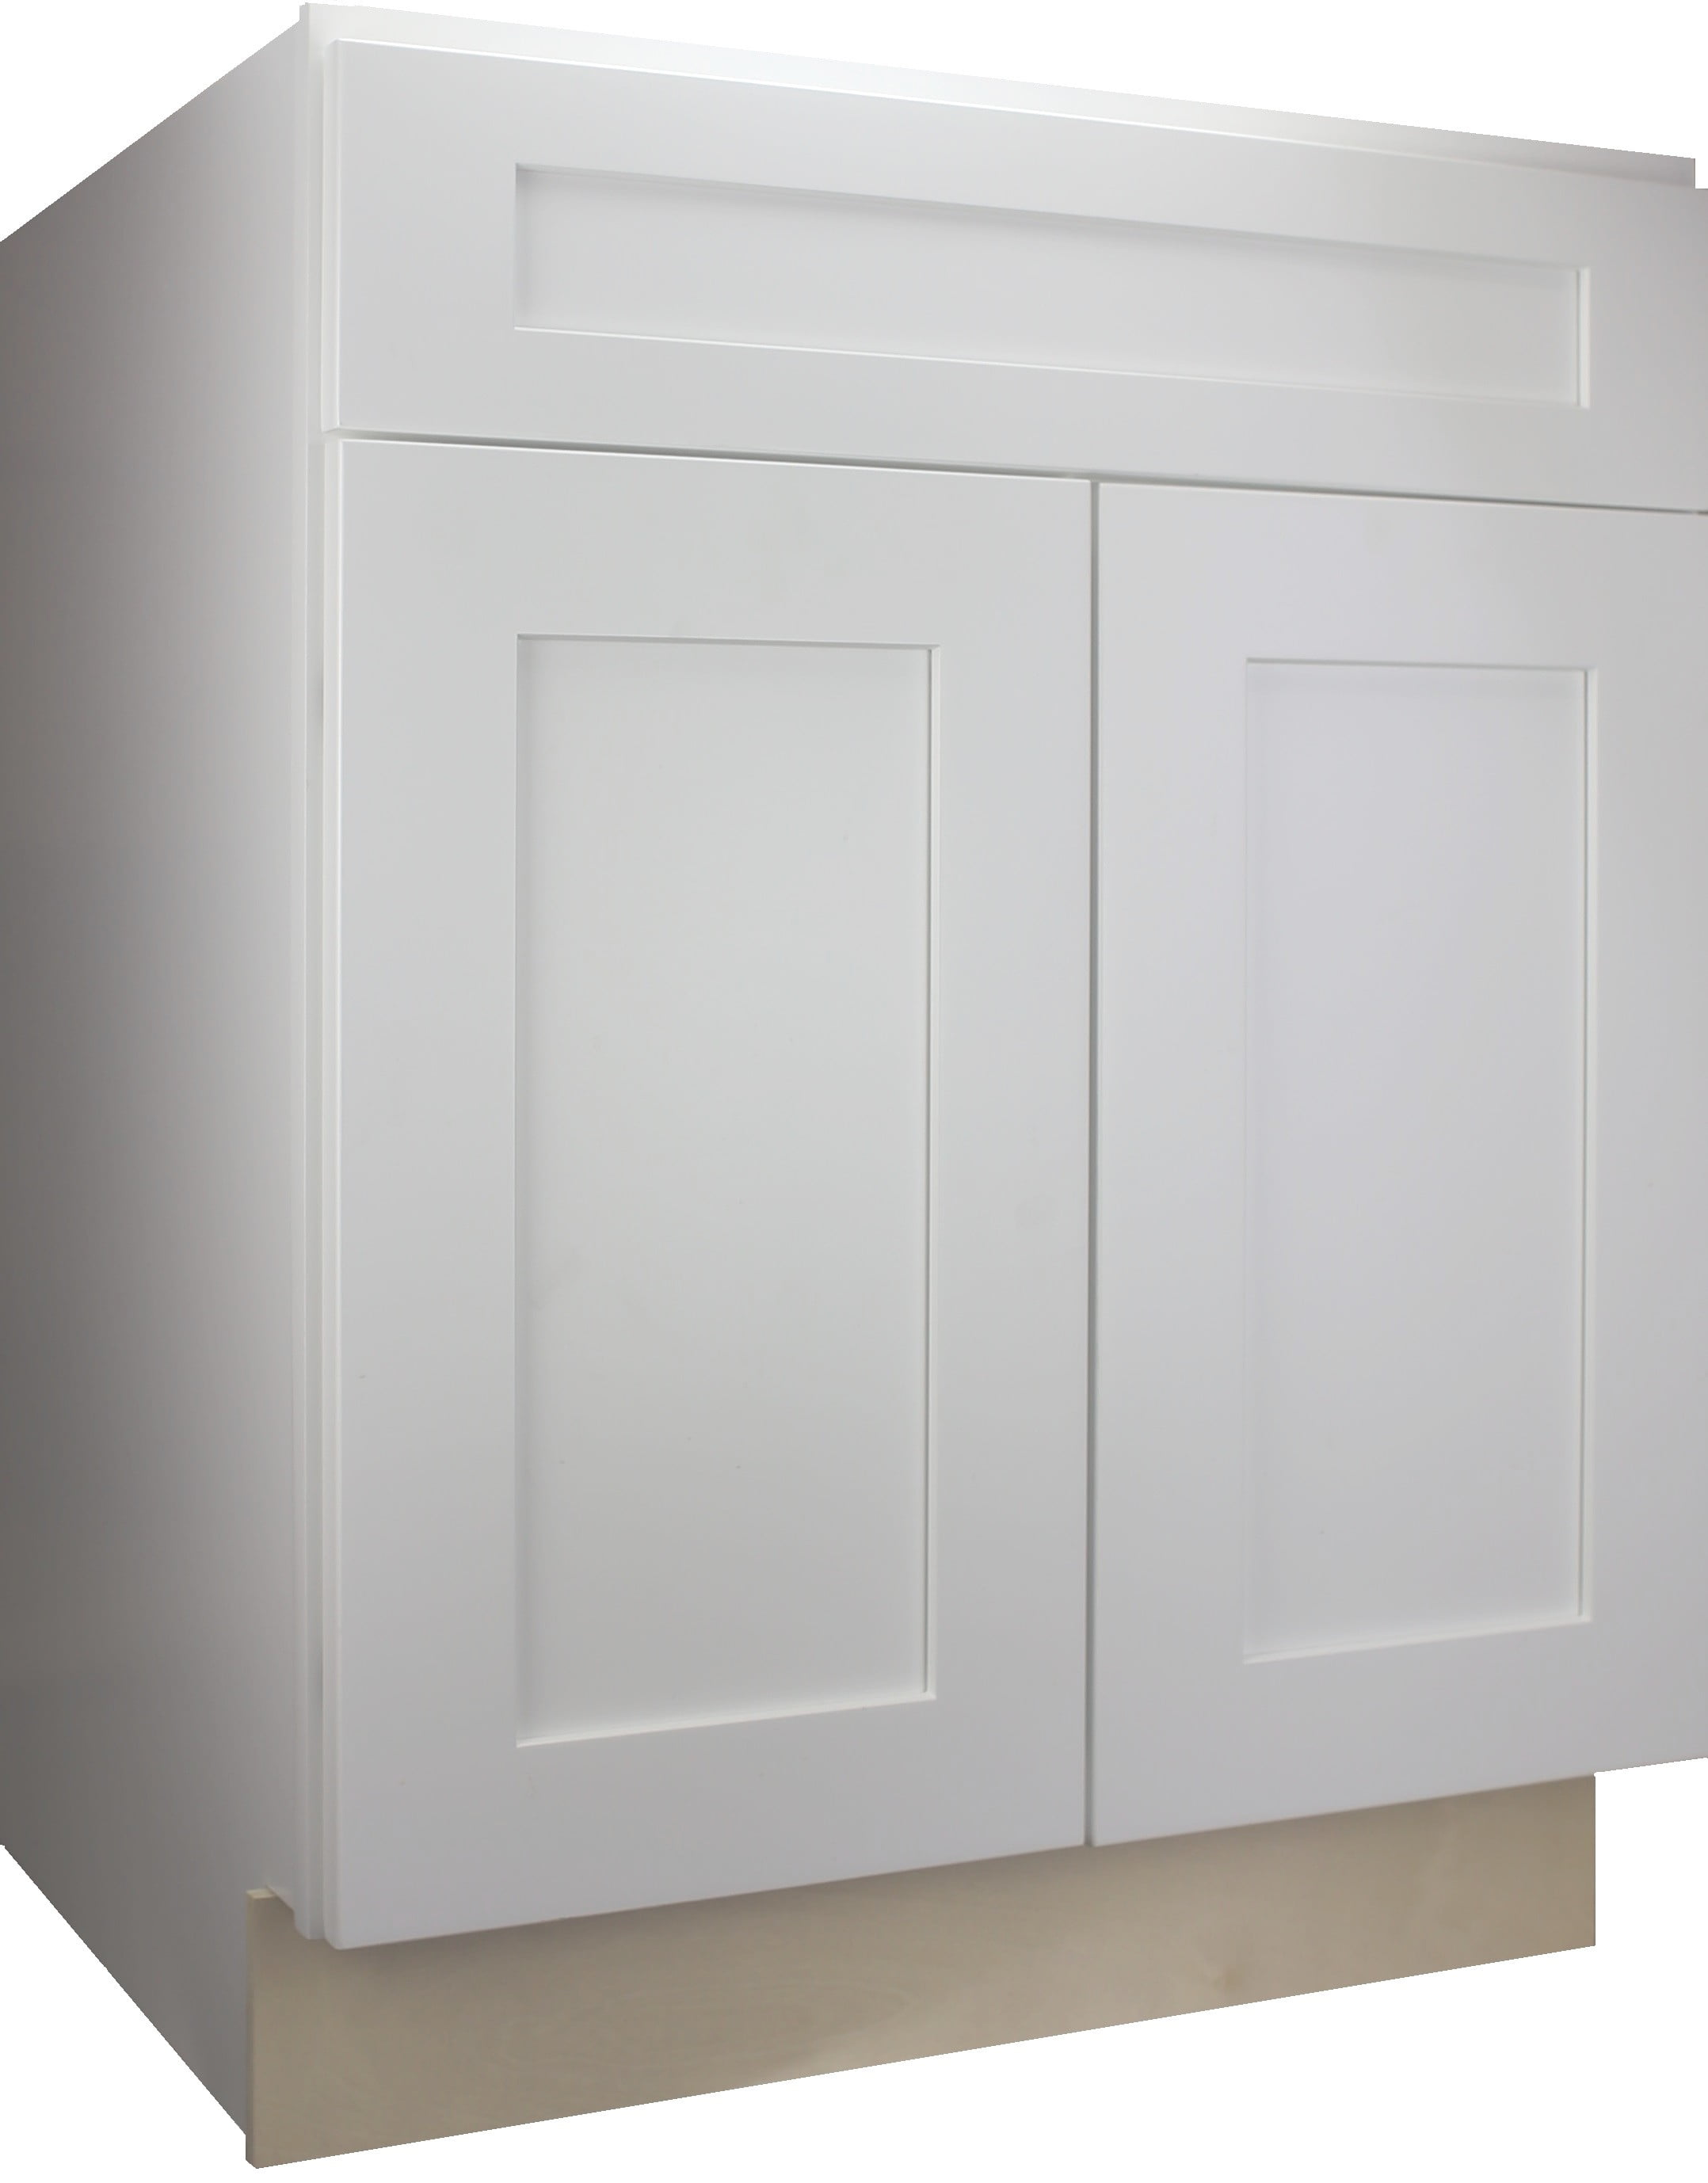 17+ Cabinet mania white shaker wall cabinet wide x tall x 12 inch deep rta kitchen cabinet best